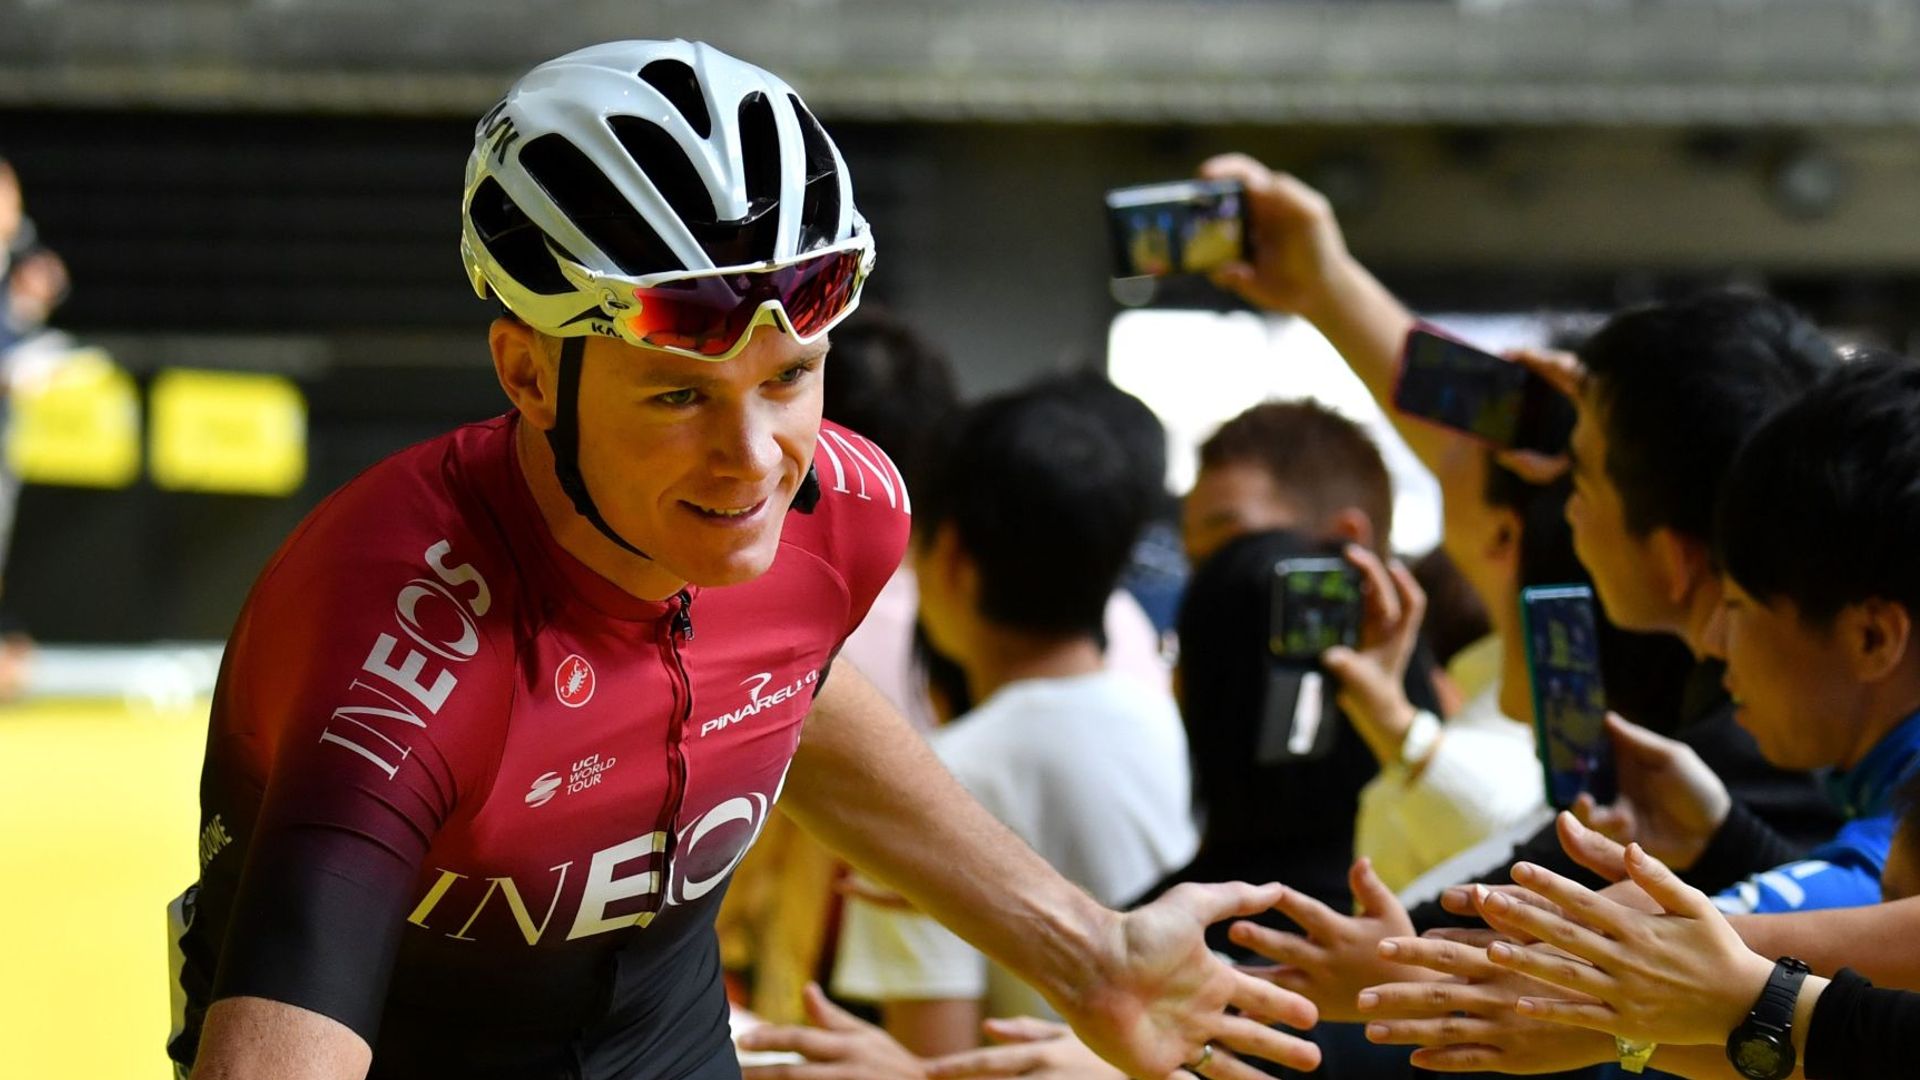 Ineos refuse to comment on Froome exit reports